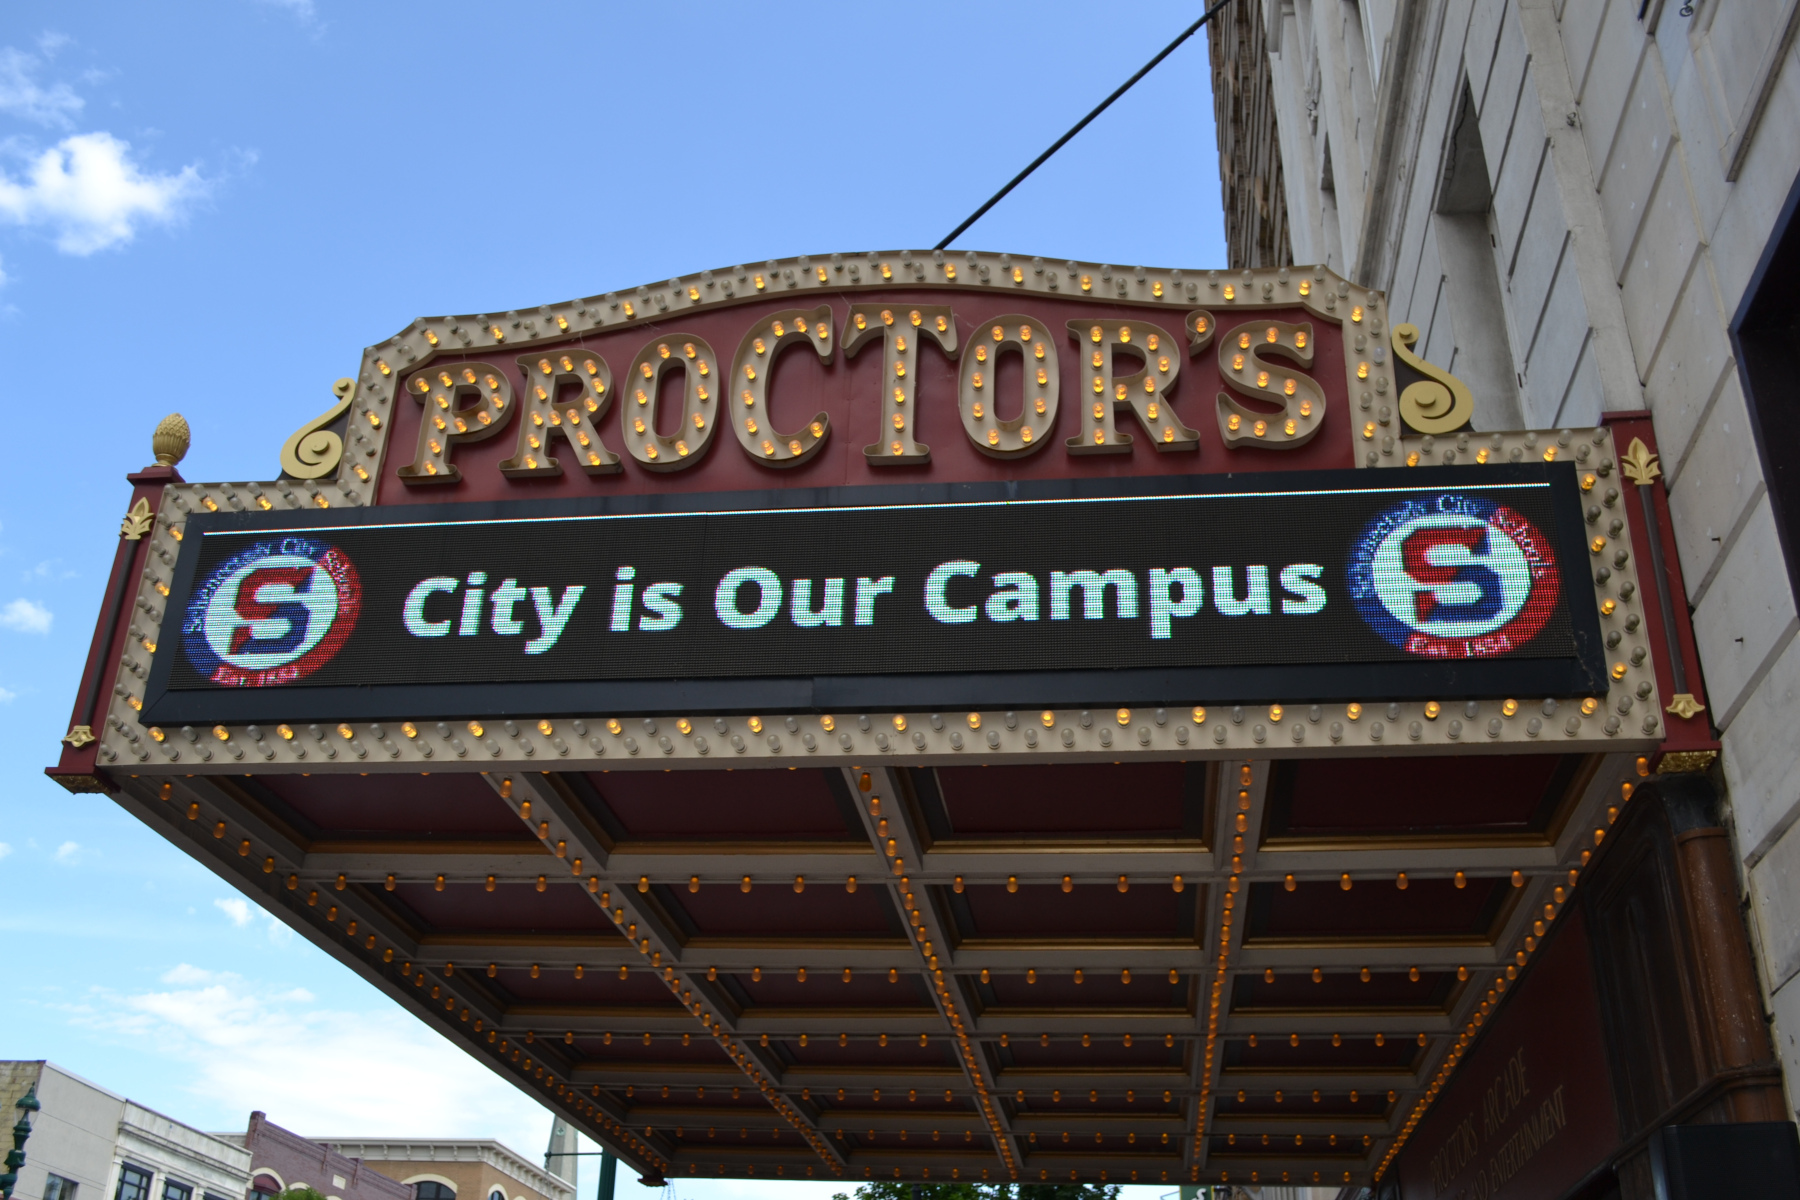 Proctors marquee saying "City As Our Campus"